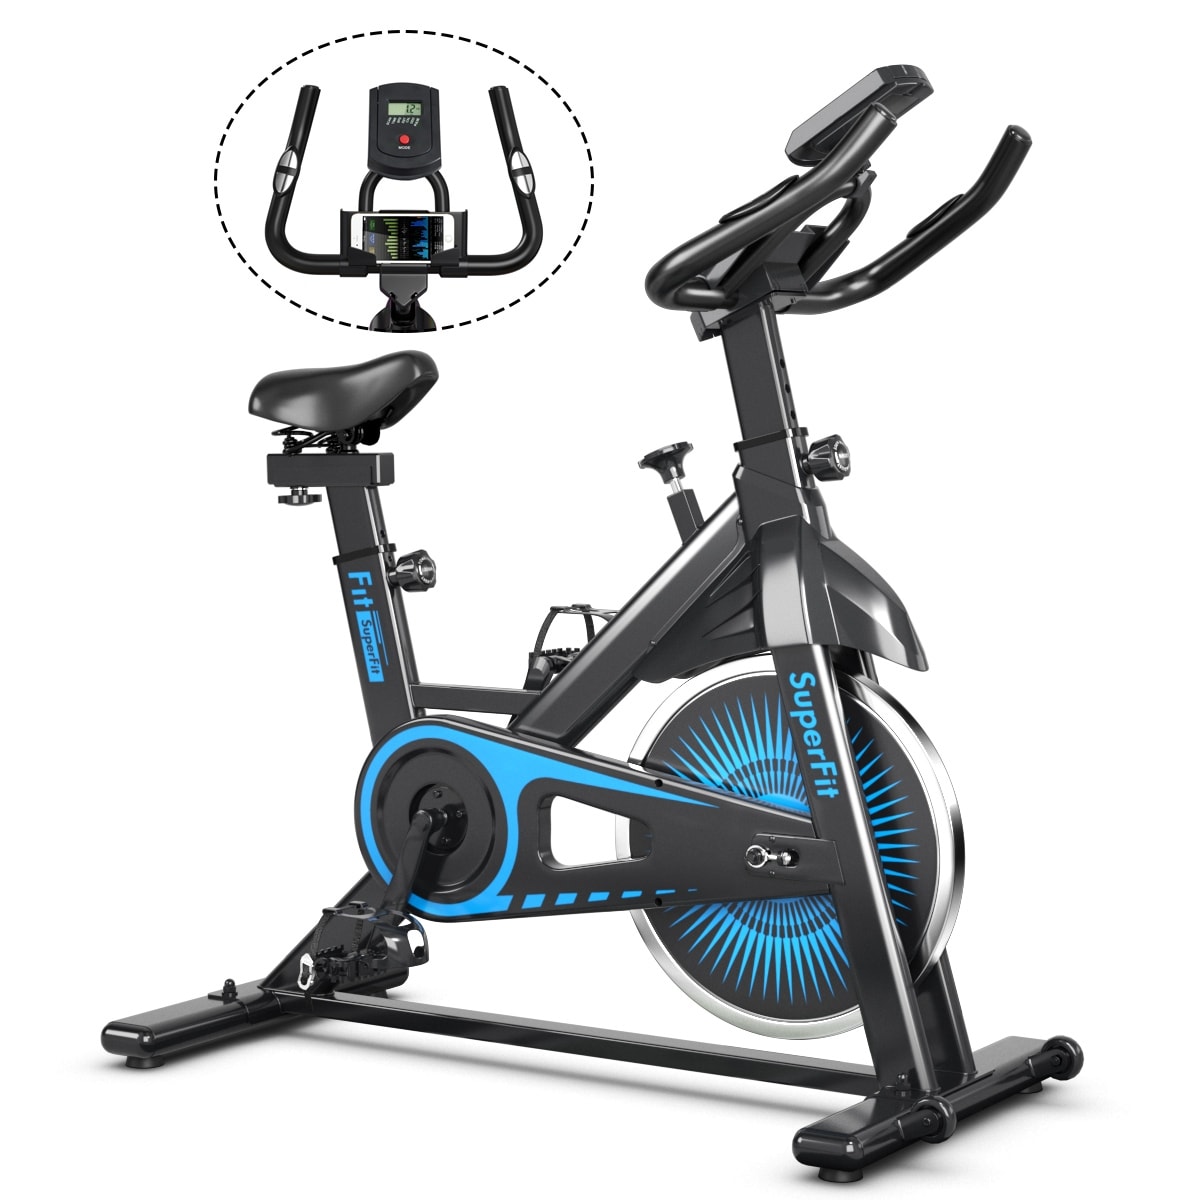 Cardio Workout & Fitness ANCHEER Exercise Spin Bike with Belt Driven Flywheel Quiet & Smooth Stationary Indoor Cycling Bike for Home Training with Adjustable Resistance Seat & Handlebars 